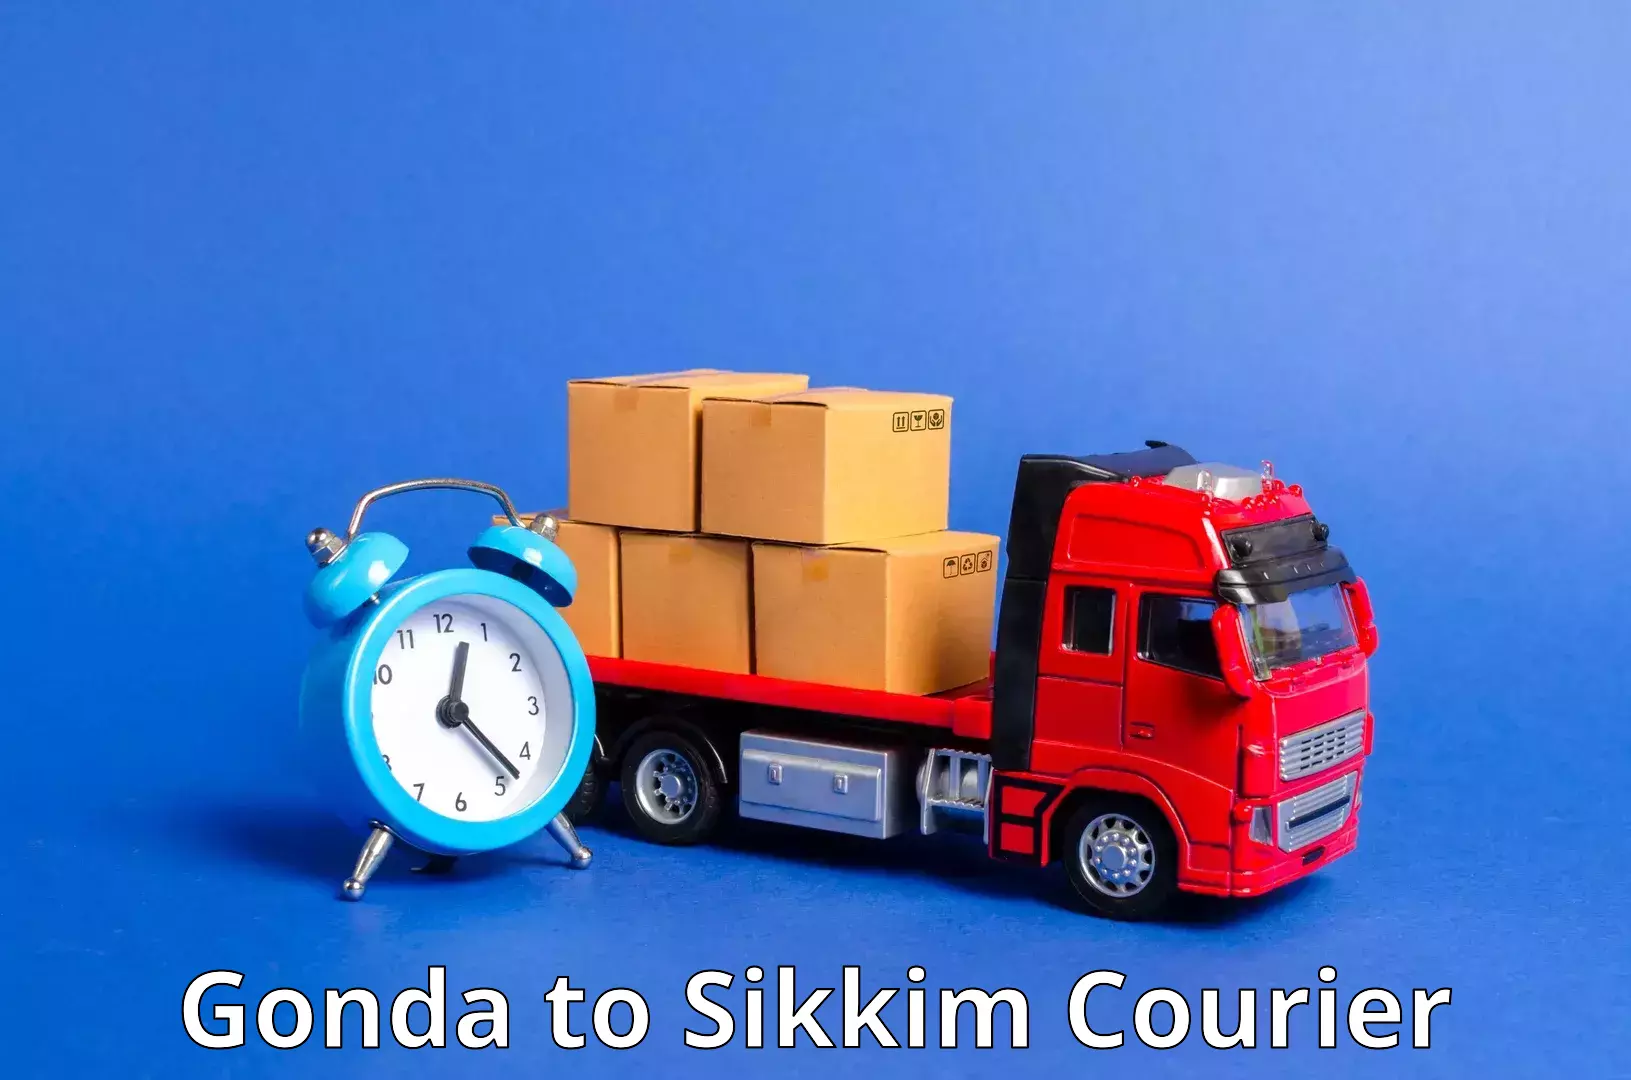 User-friendly delivery service Gonda to Pelling